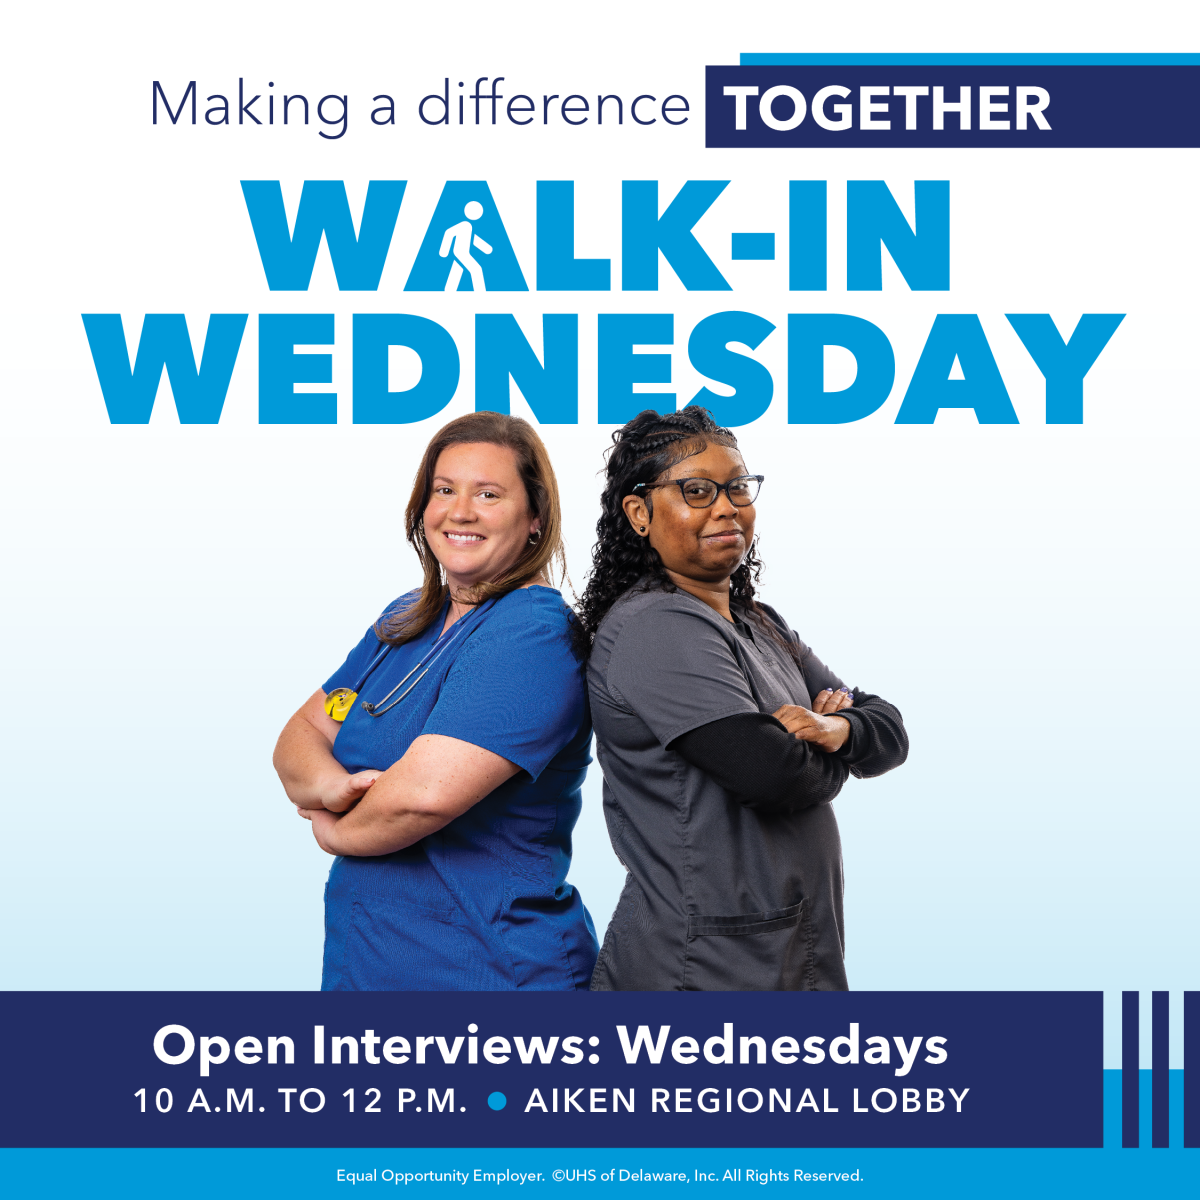 Walk-In Wednesday Graphic featuring message "making a difference together"